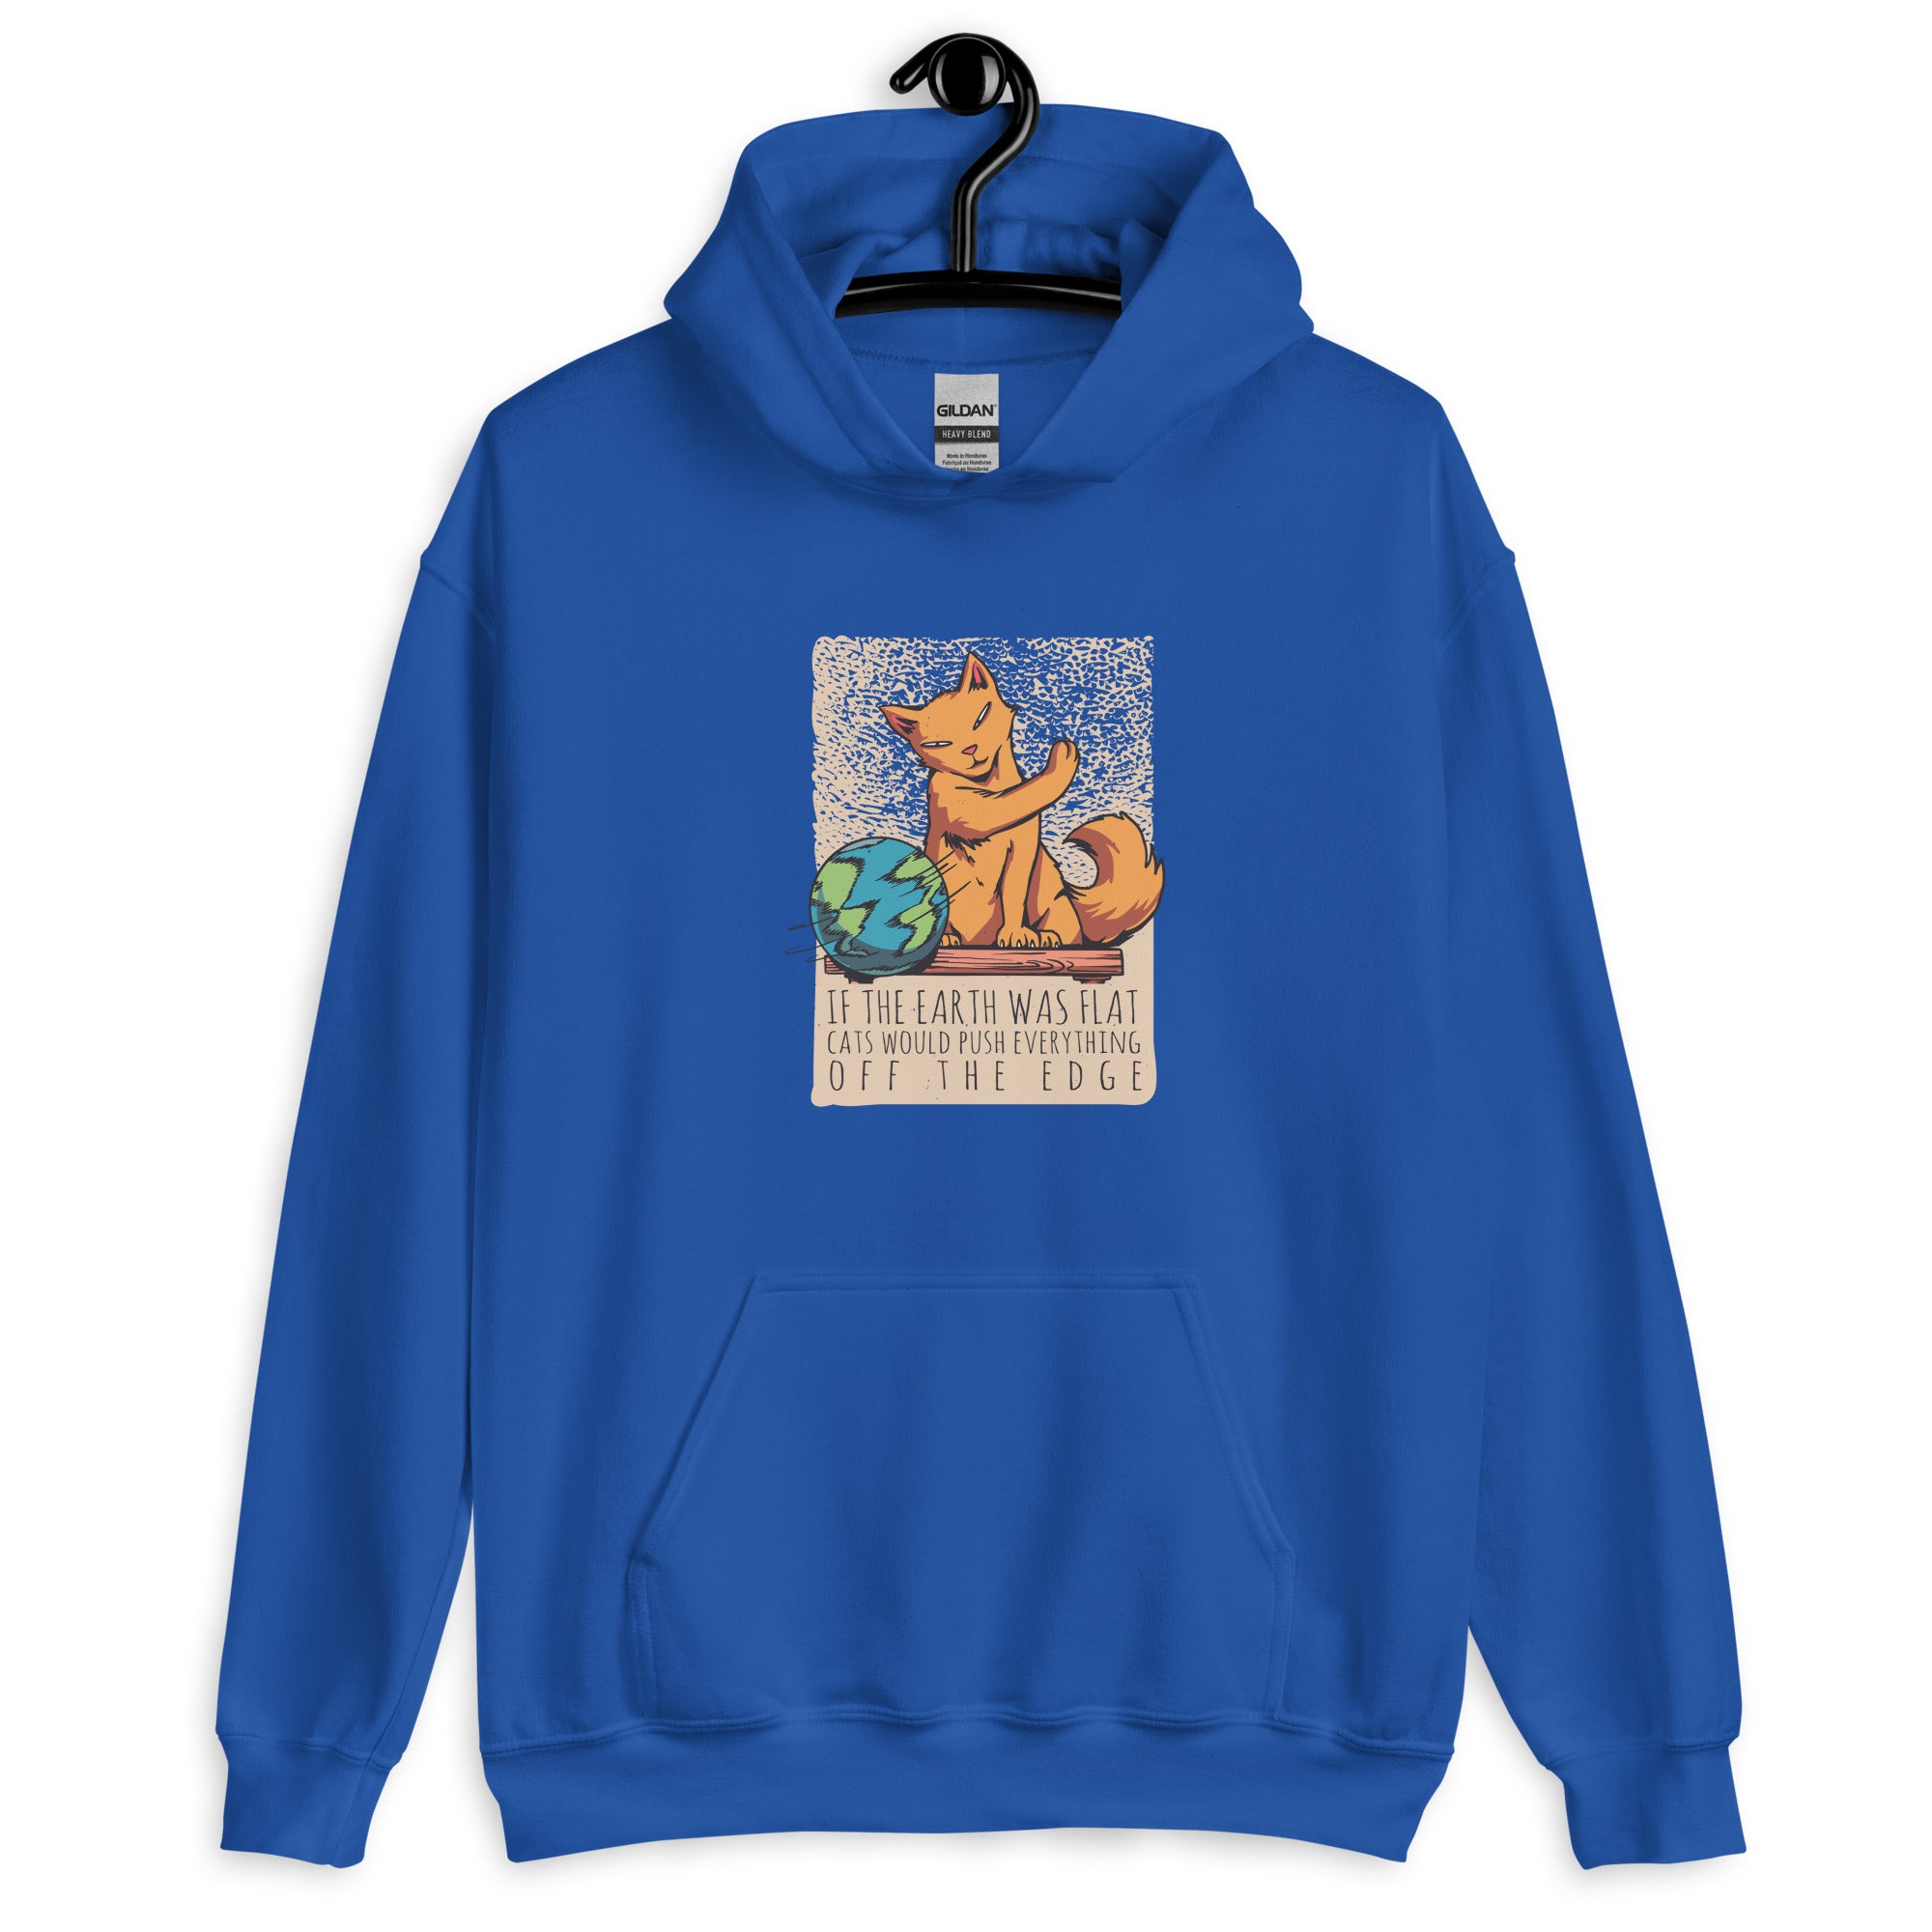 Unisex Hoodie | If the earth was flat, cats would push everything off the edge